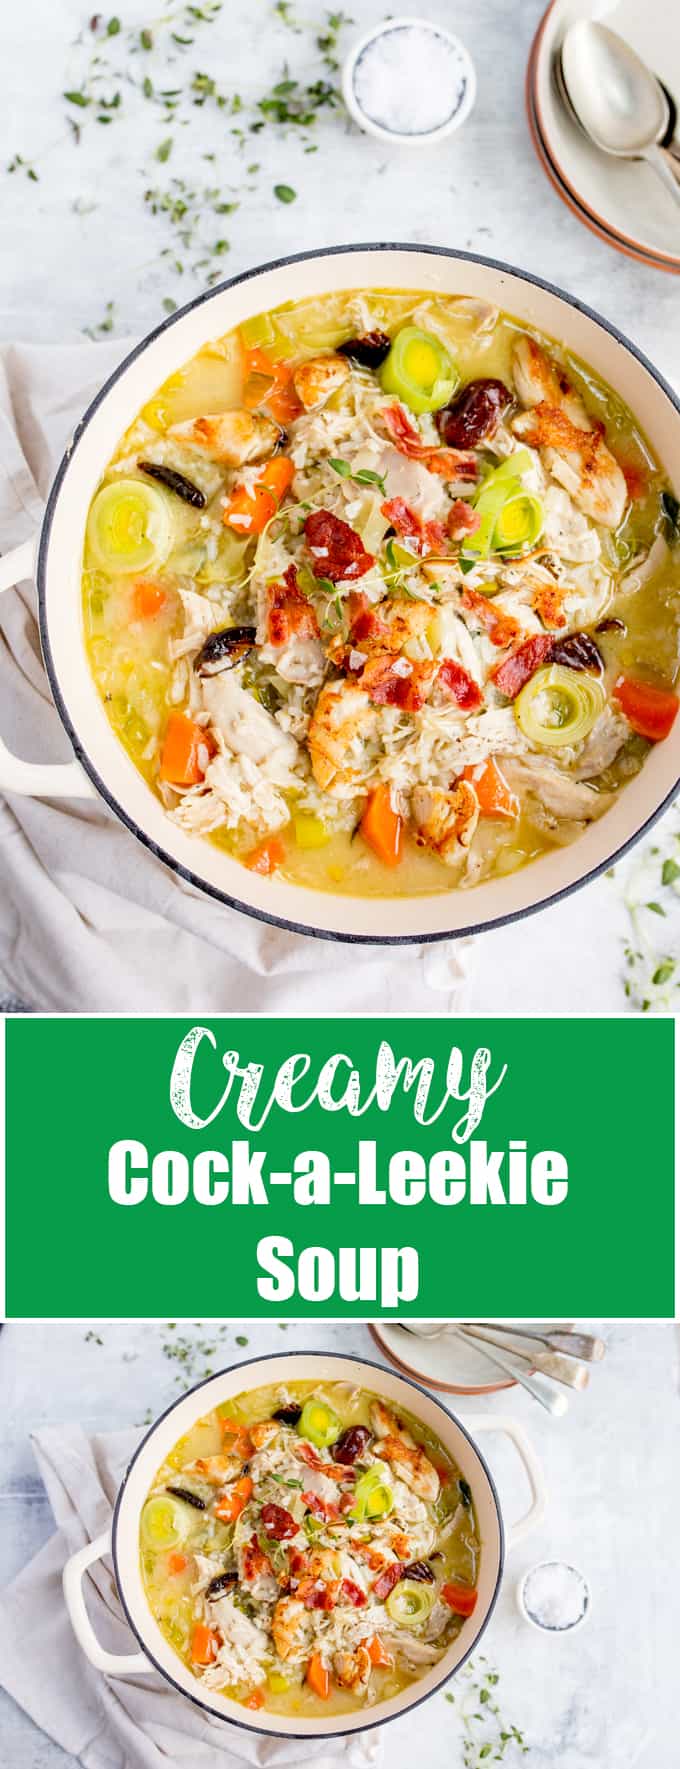 If you're looking for a filling and warming dinner, this Creamy Cock a Leekie Soup with Bacon and Rice is just the thing! #chickensoup #creamysoup #scottishrecipe #bacon